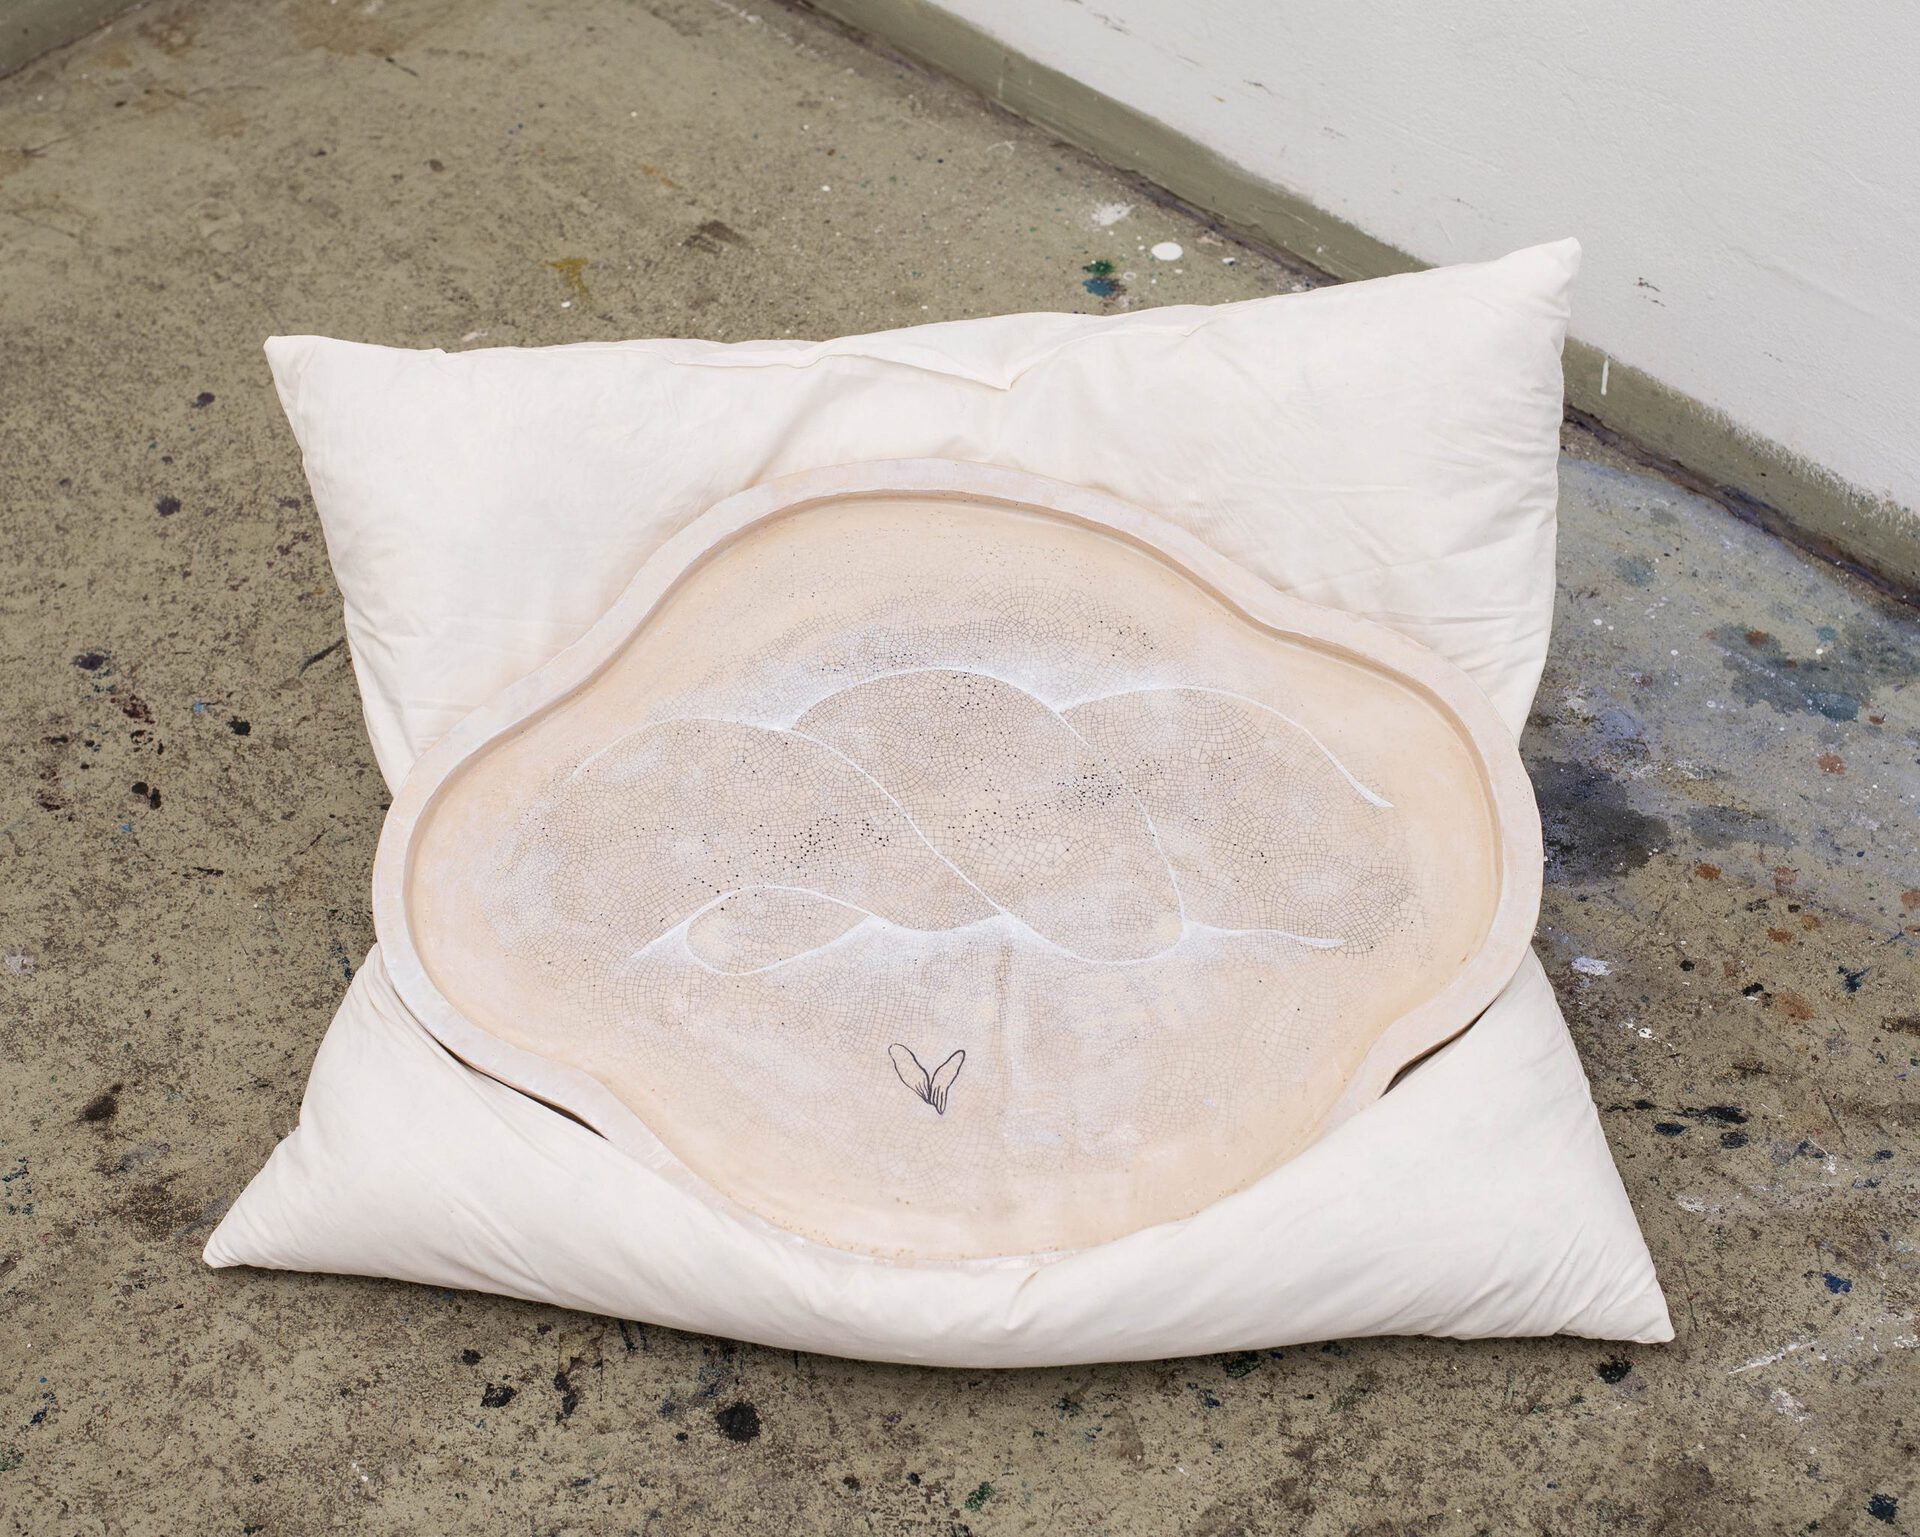 Pho 2, 2021, oil on ceramics, ~ 30 x 40 cm, installed on feather pillow